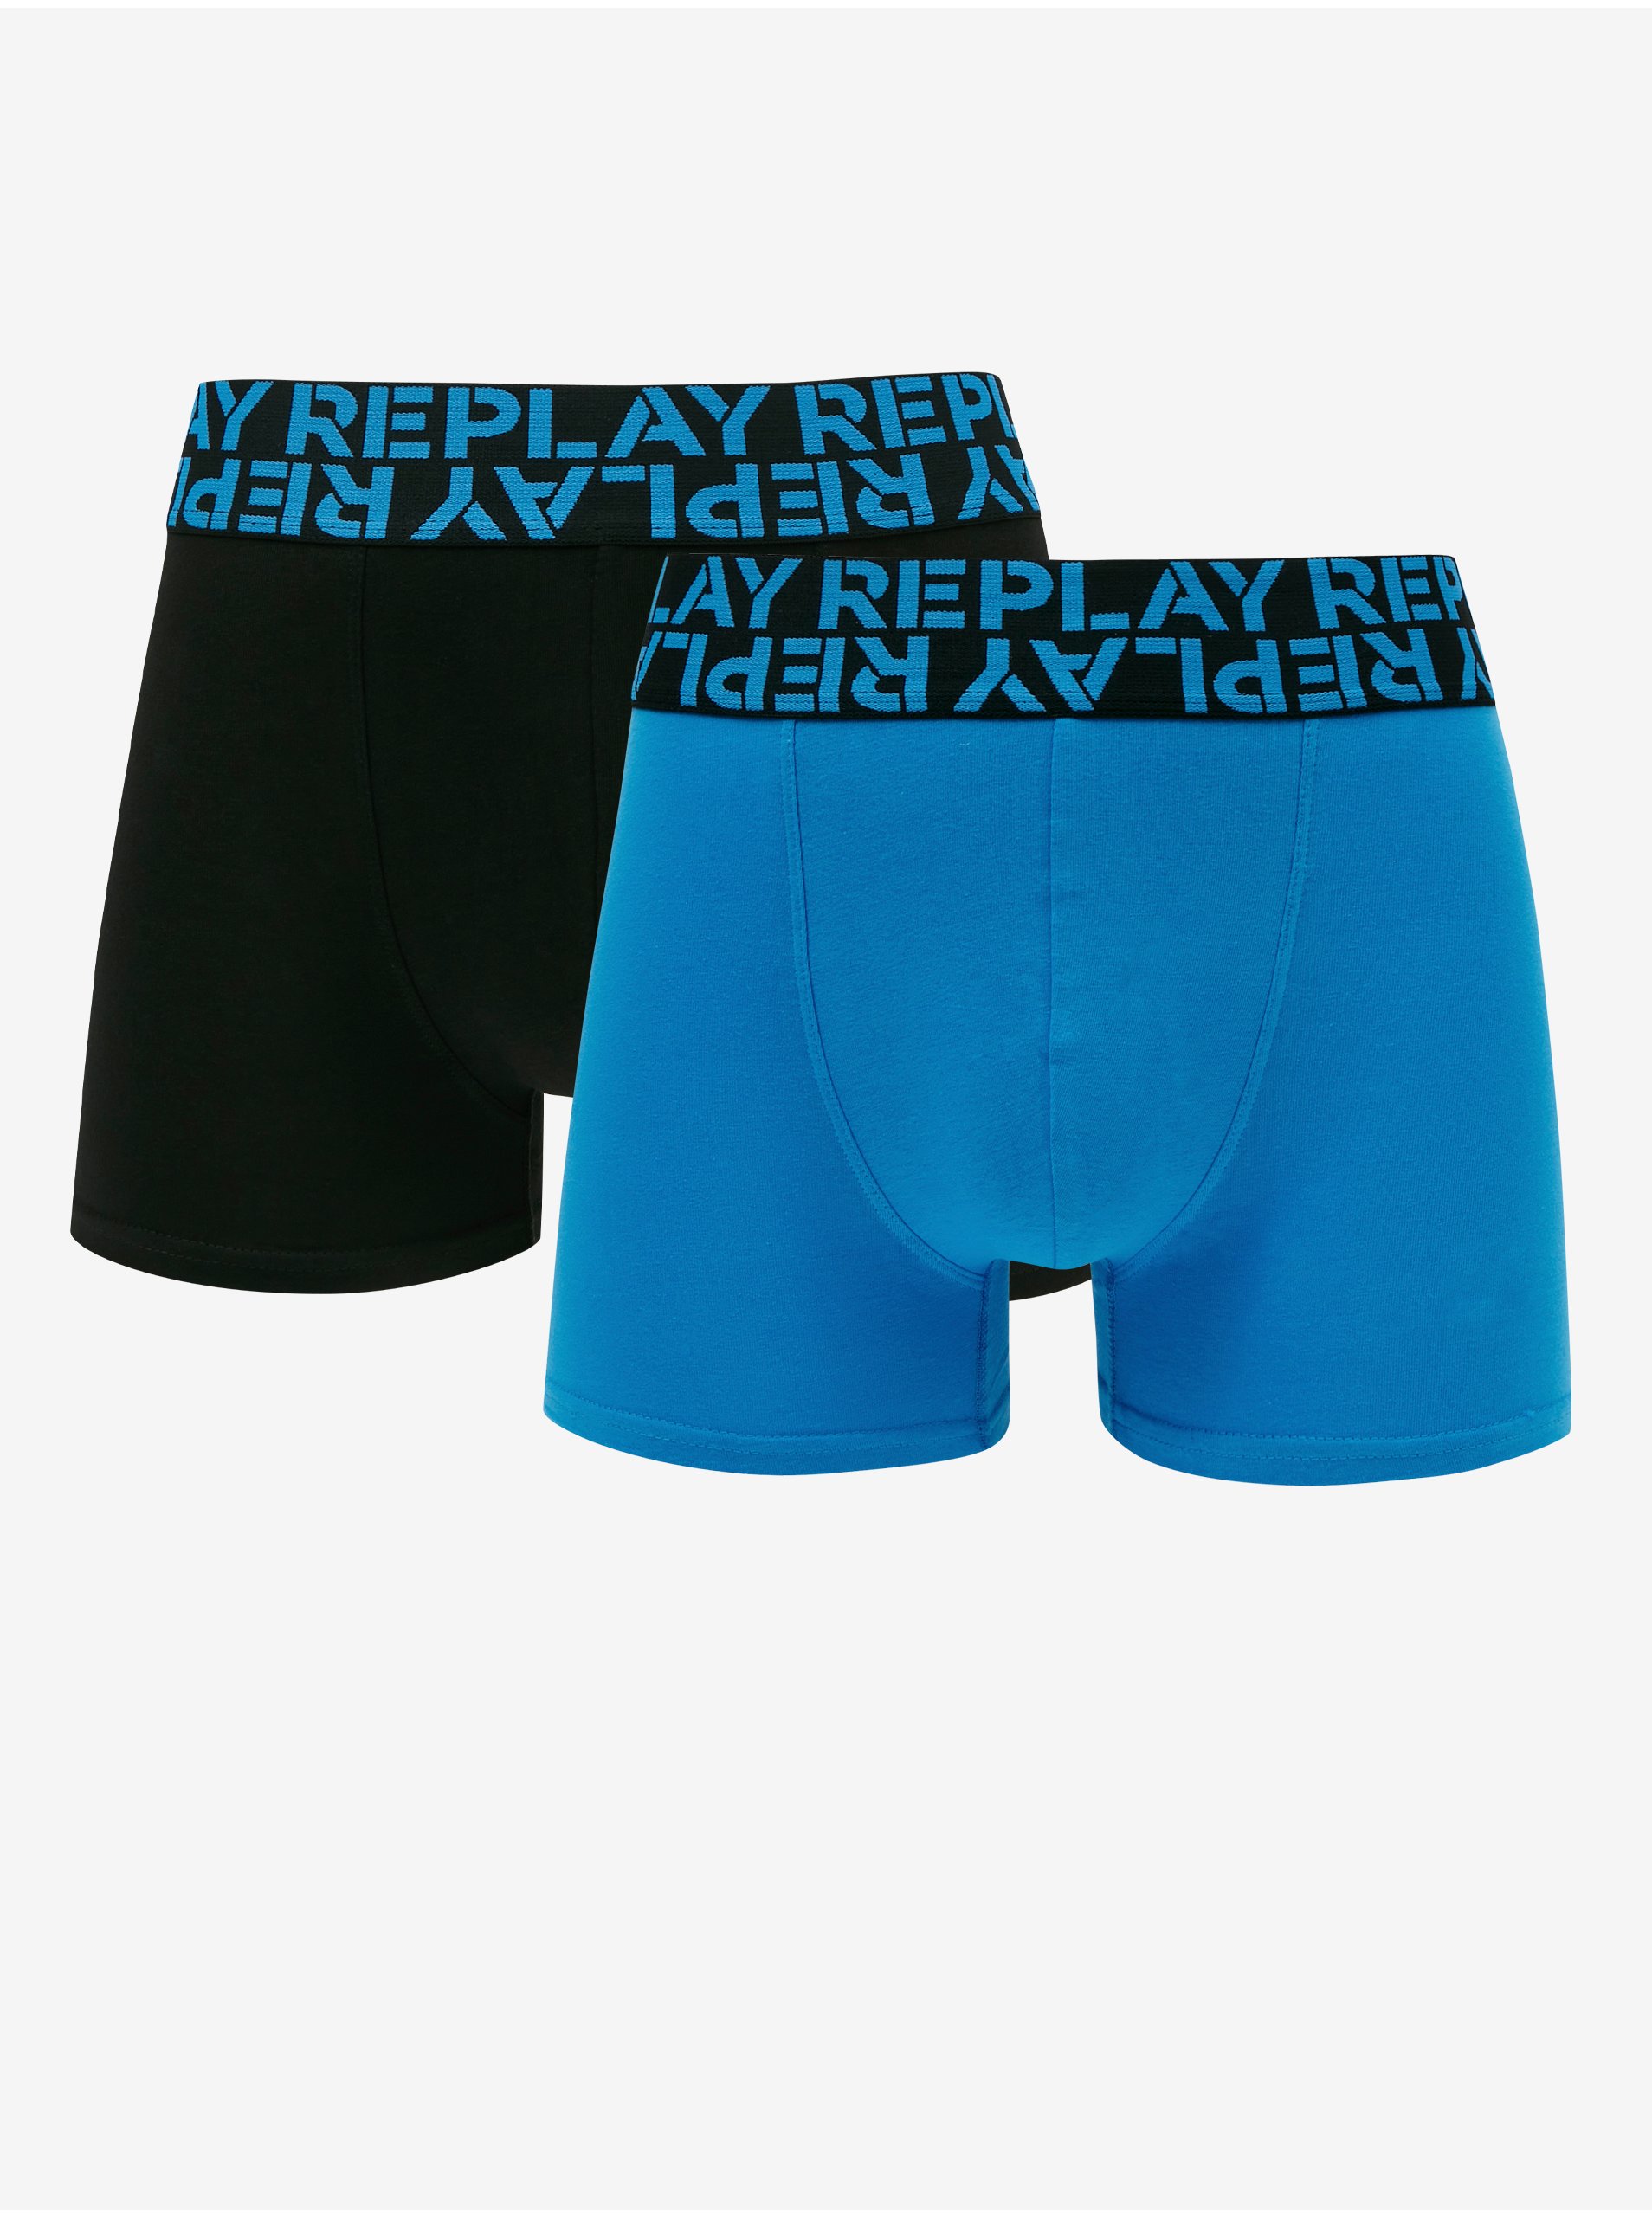 Set of two men's boxers in black and blue Replay - Men